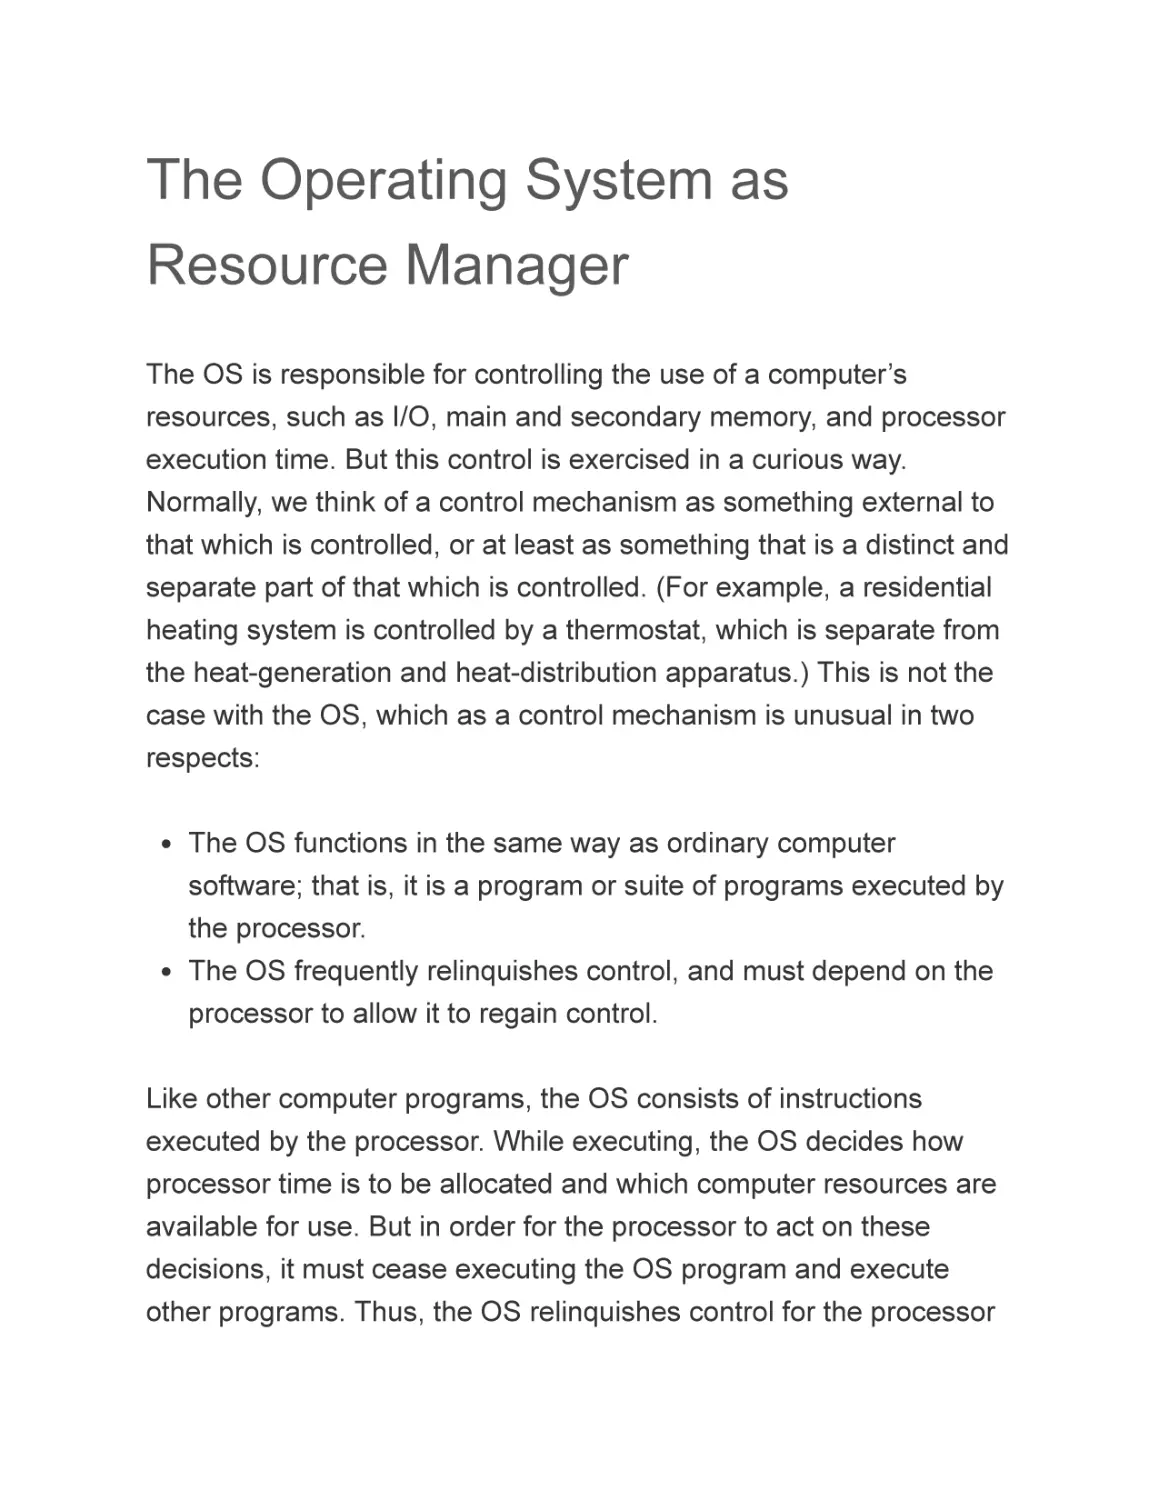 The Operating System as Resource Manager